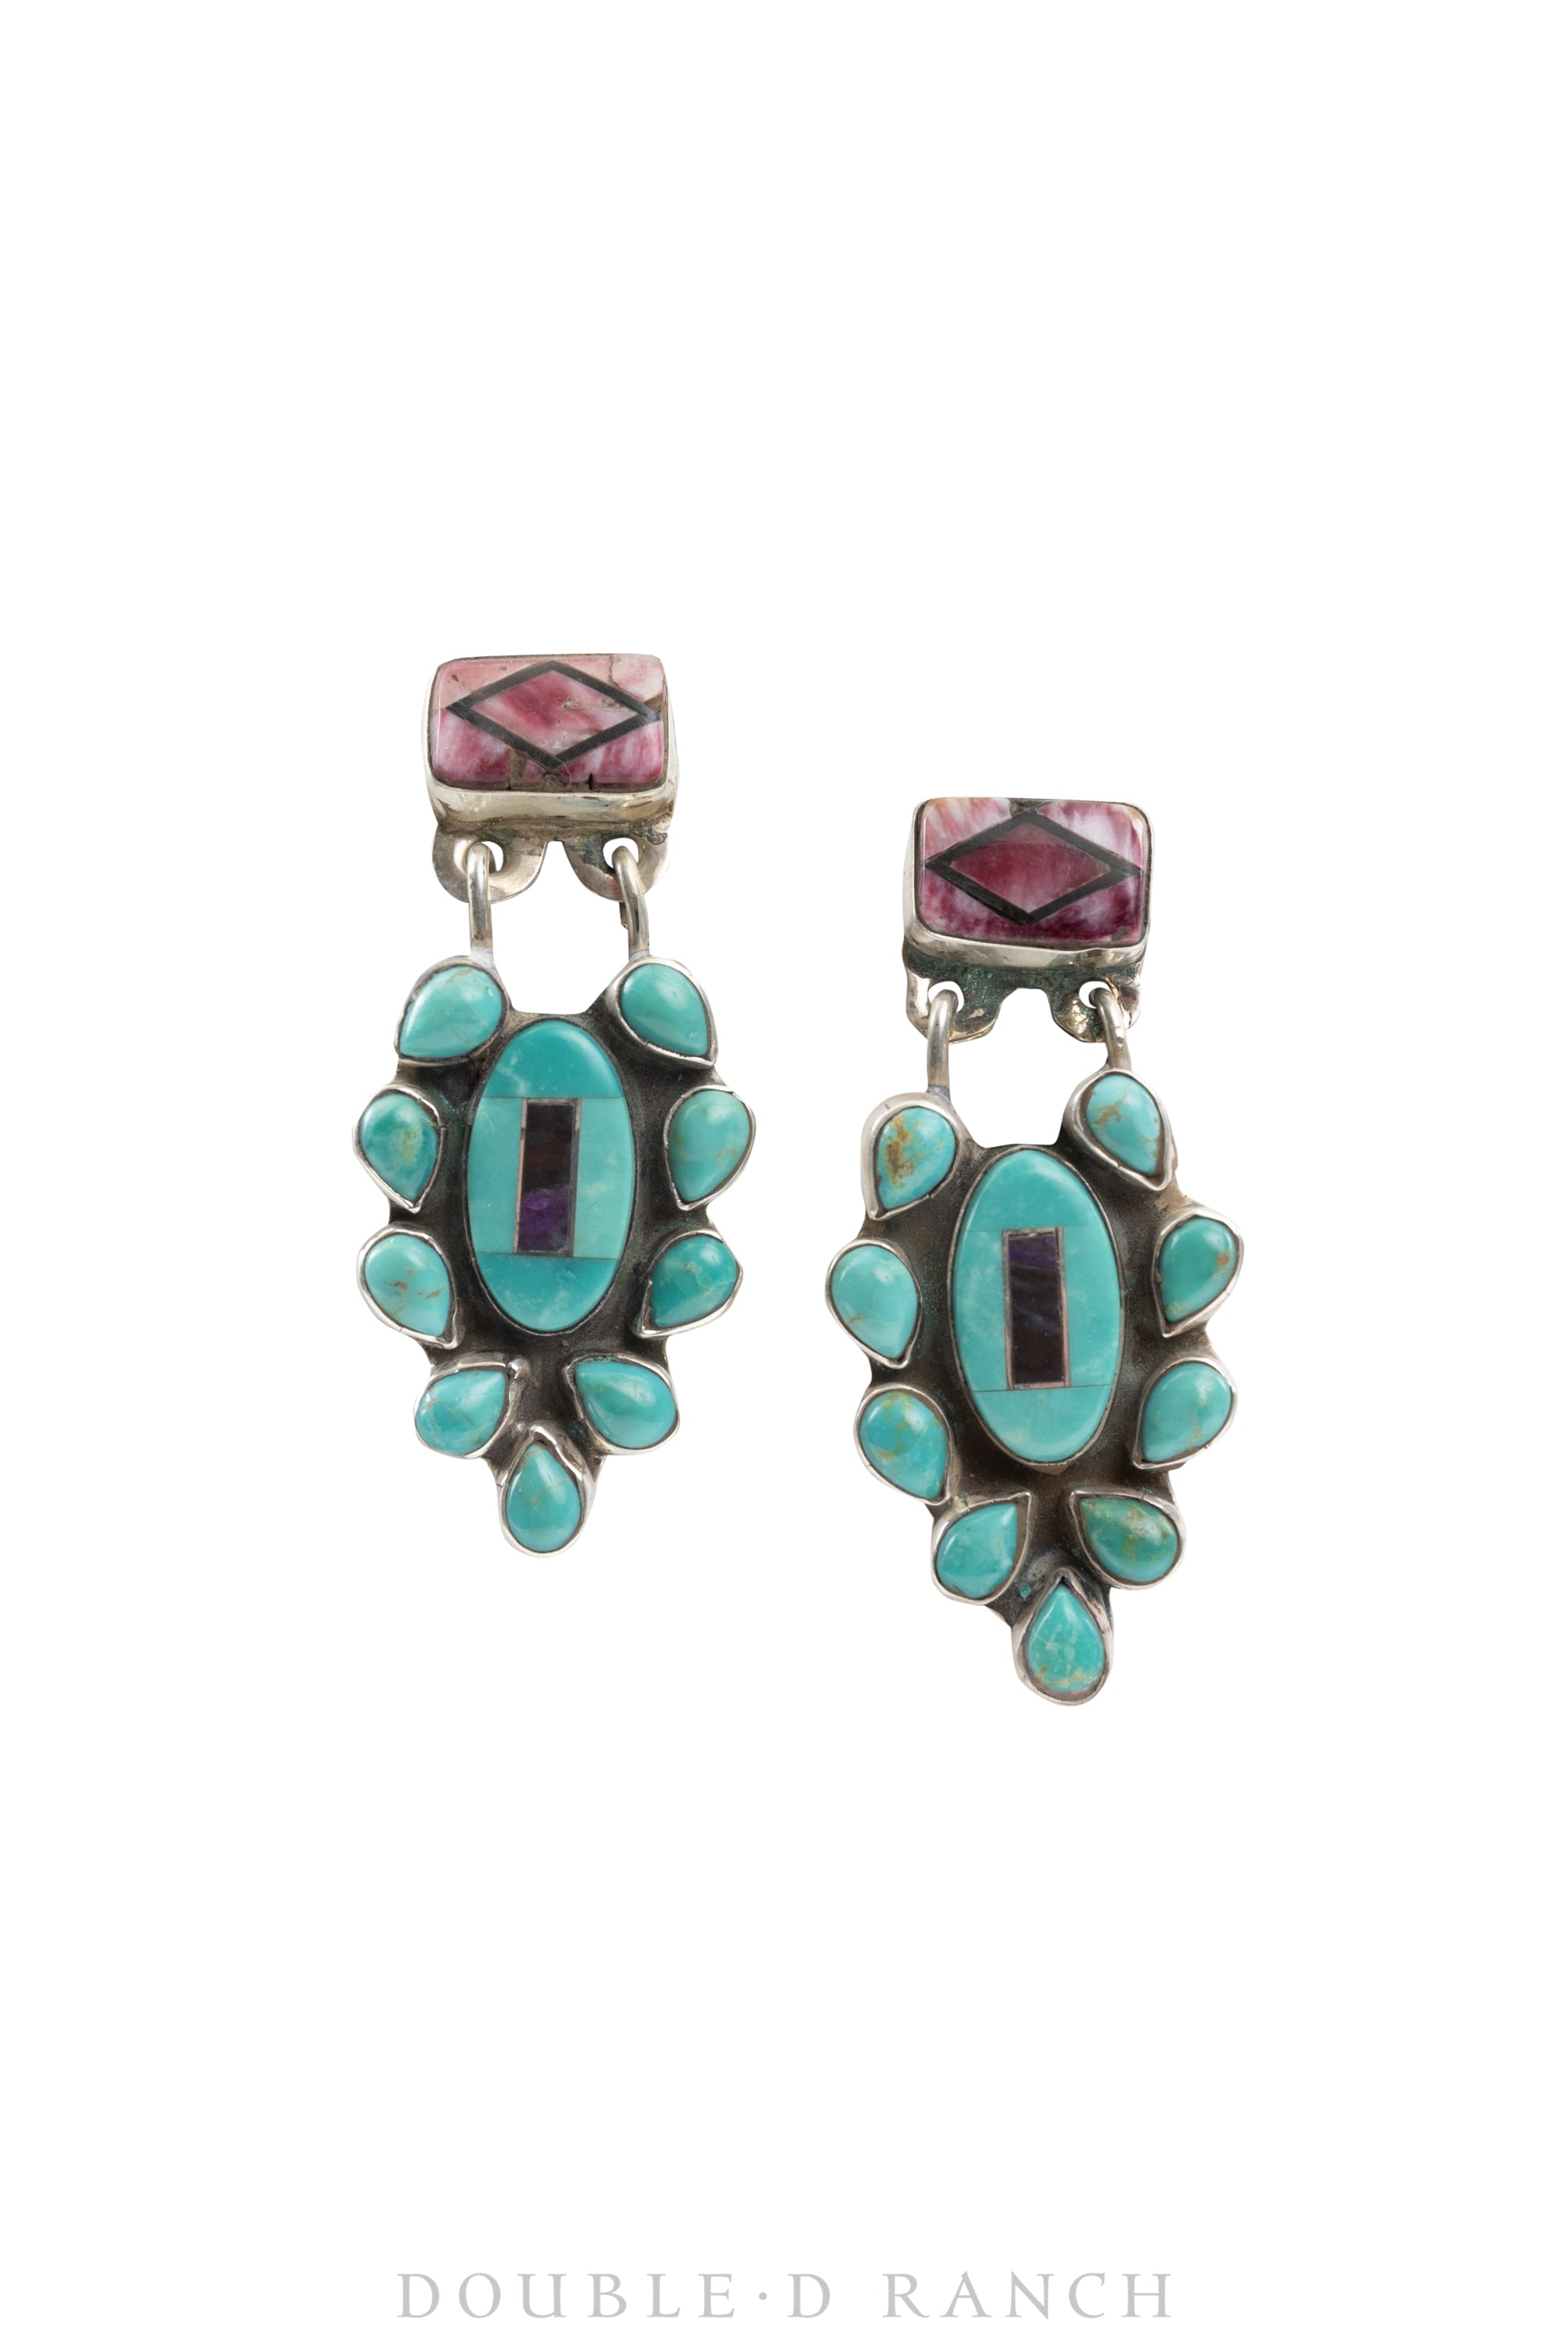 Earrings, Oscar Betz, Chandelier, Inlay, Turquoise, Purple Spiny Oyster, Hallmark, Contemporary,1583